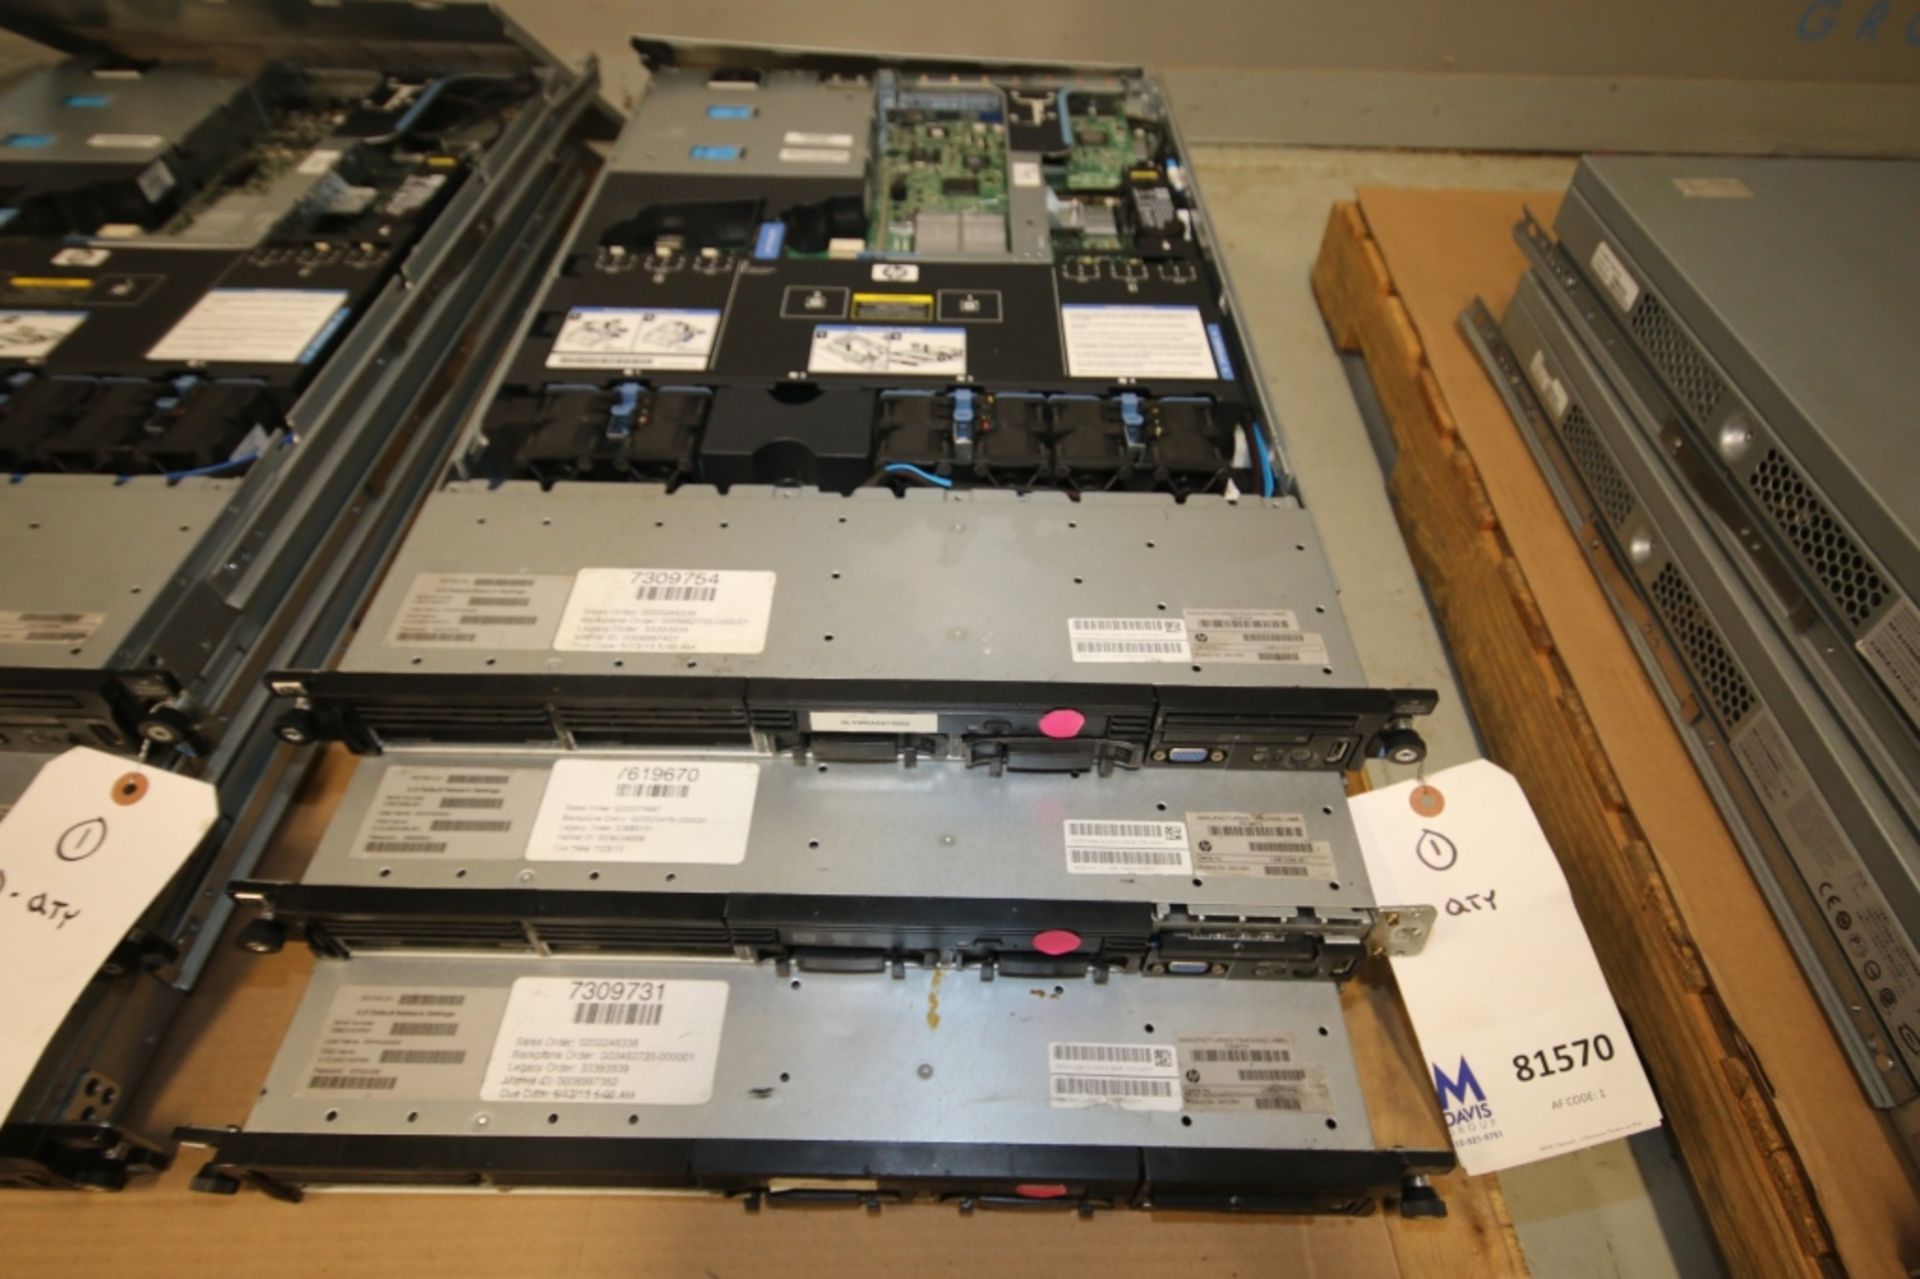 Lot of (3) HP Server Rack Units, Type 700501102B DL360G7 SRVR 1CPU MID7 with DVD Drives, (INV#